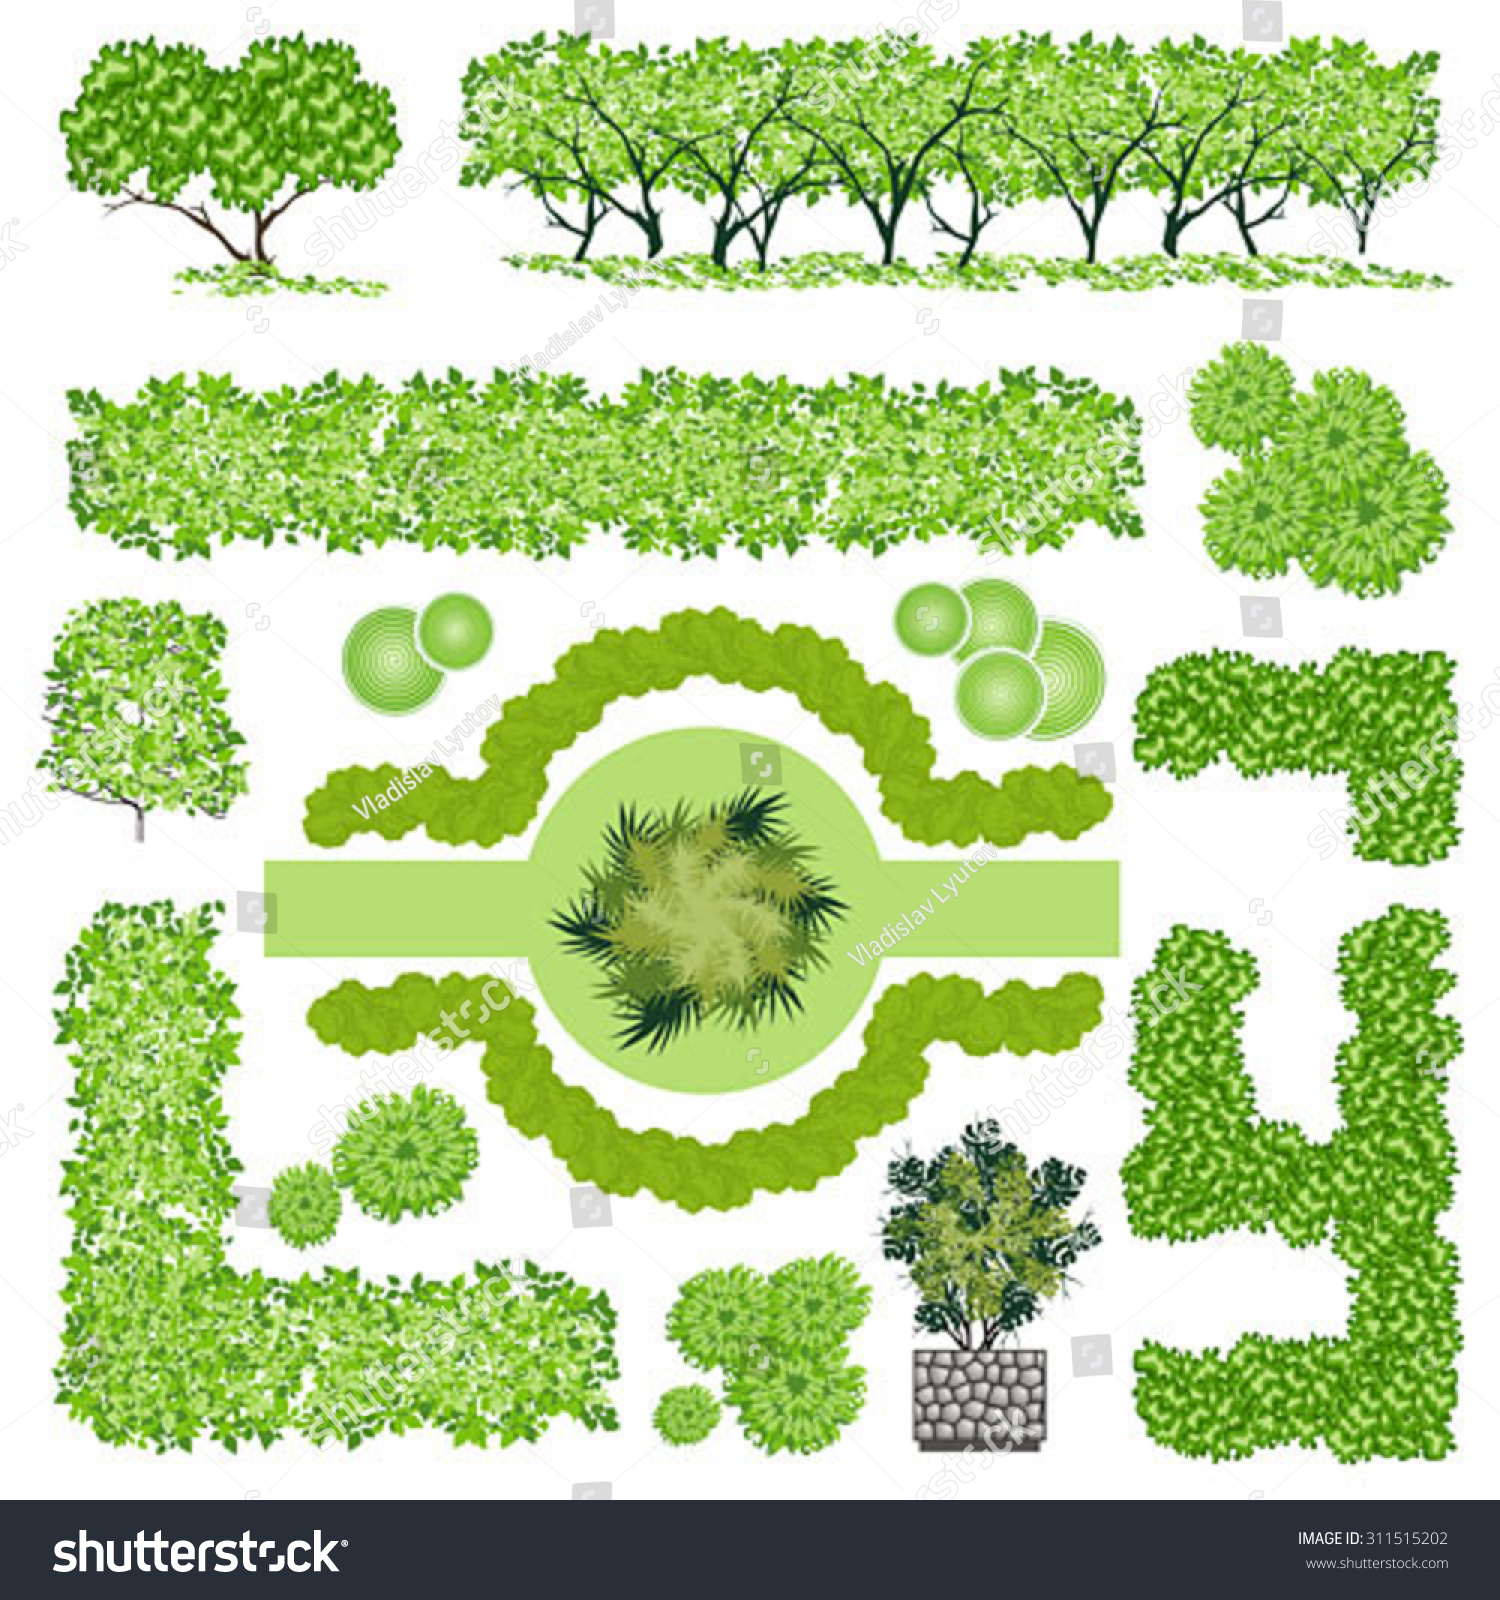 landscaping clipart for design - photo #23